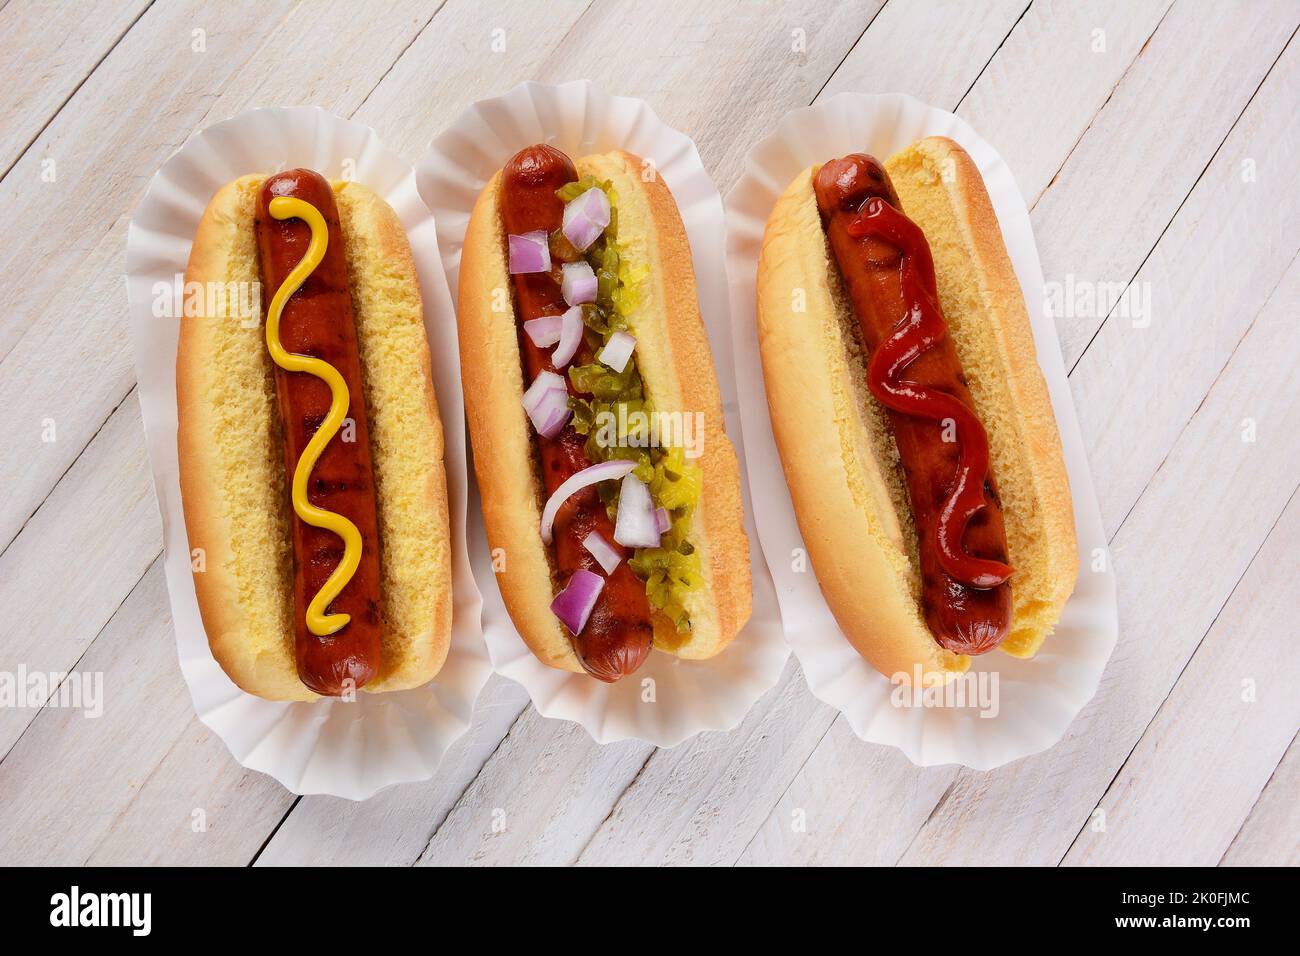 Top view of three hot dogs on a wood table with different condiments. Stock Photo